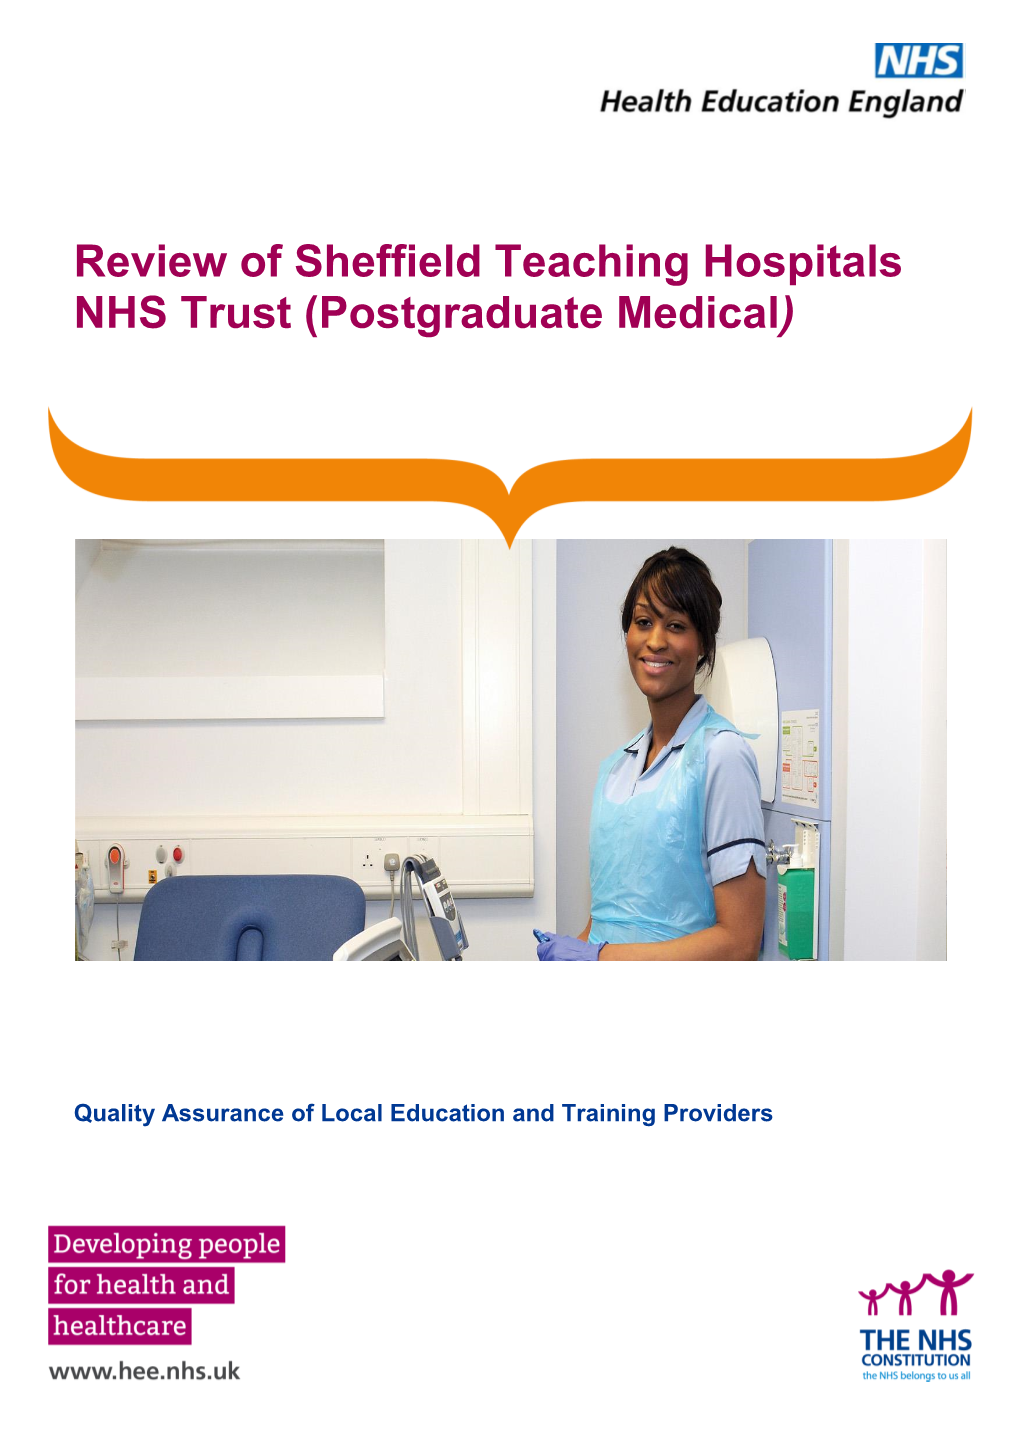 Review of Sheffield Teaching Hospitals NHS Trust (Postgraduate Medical)